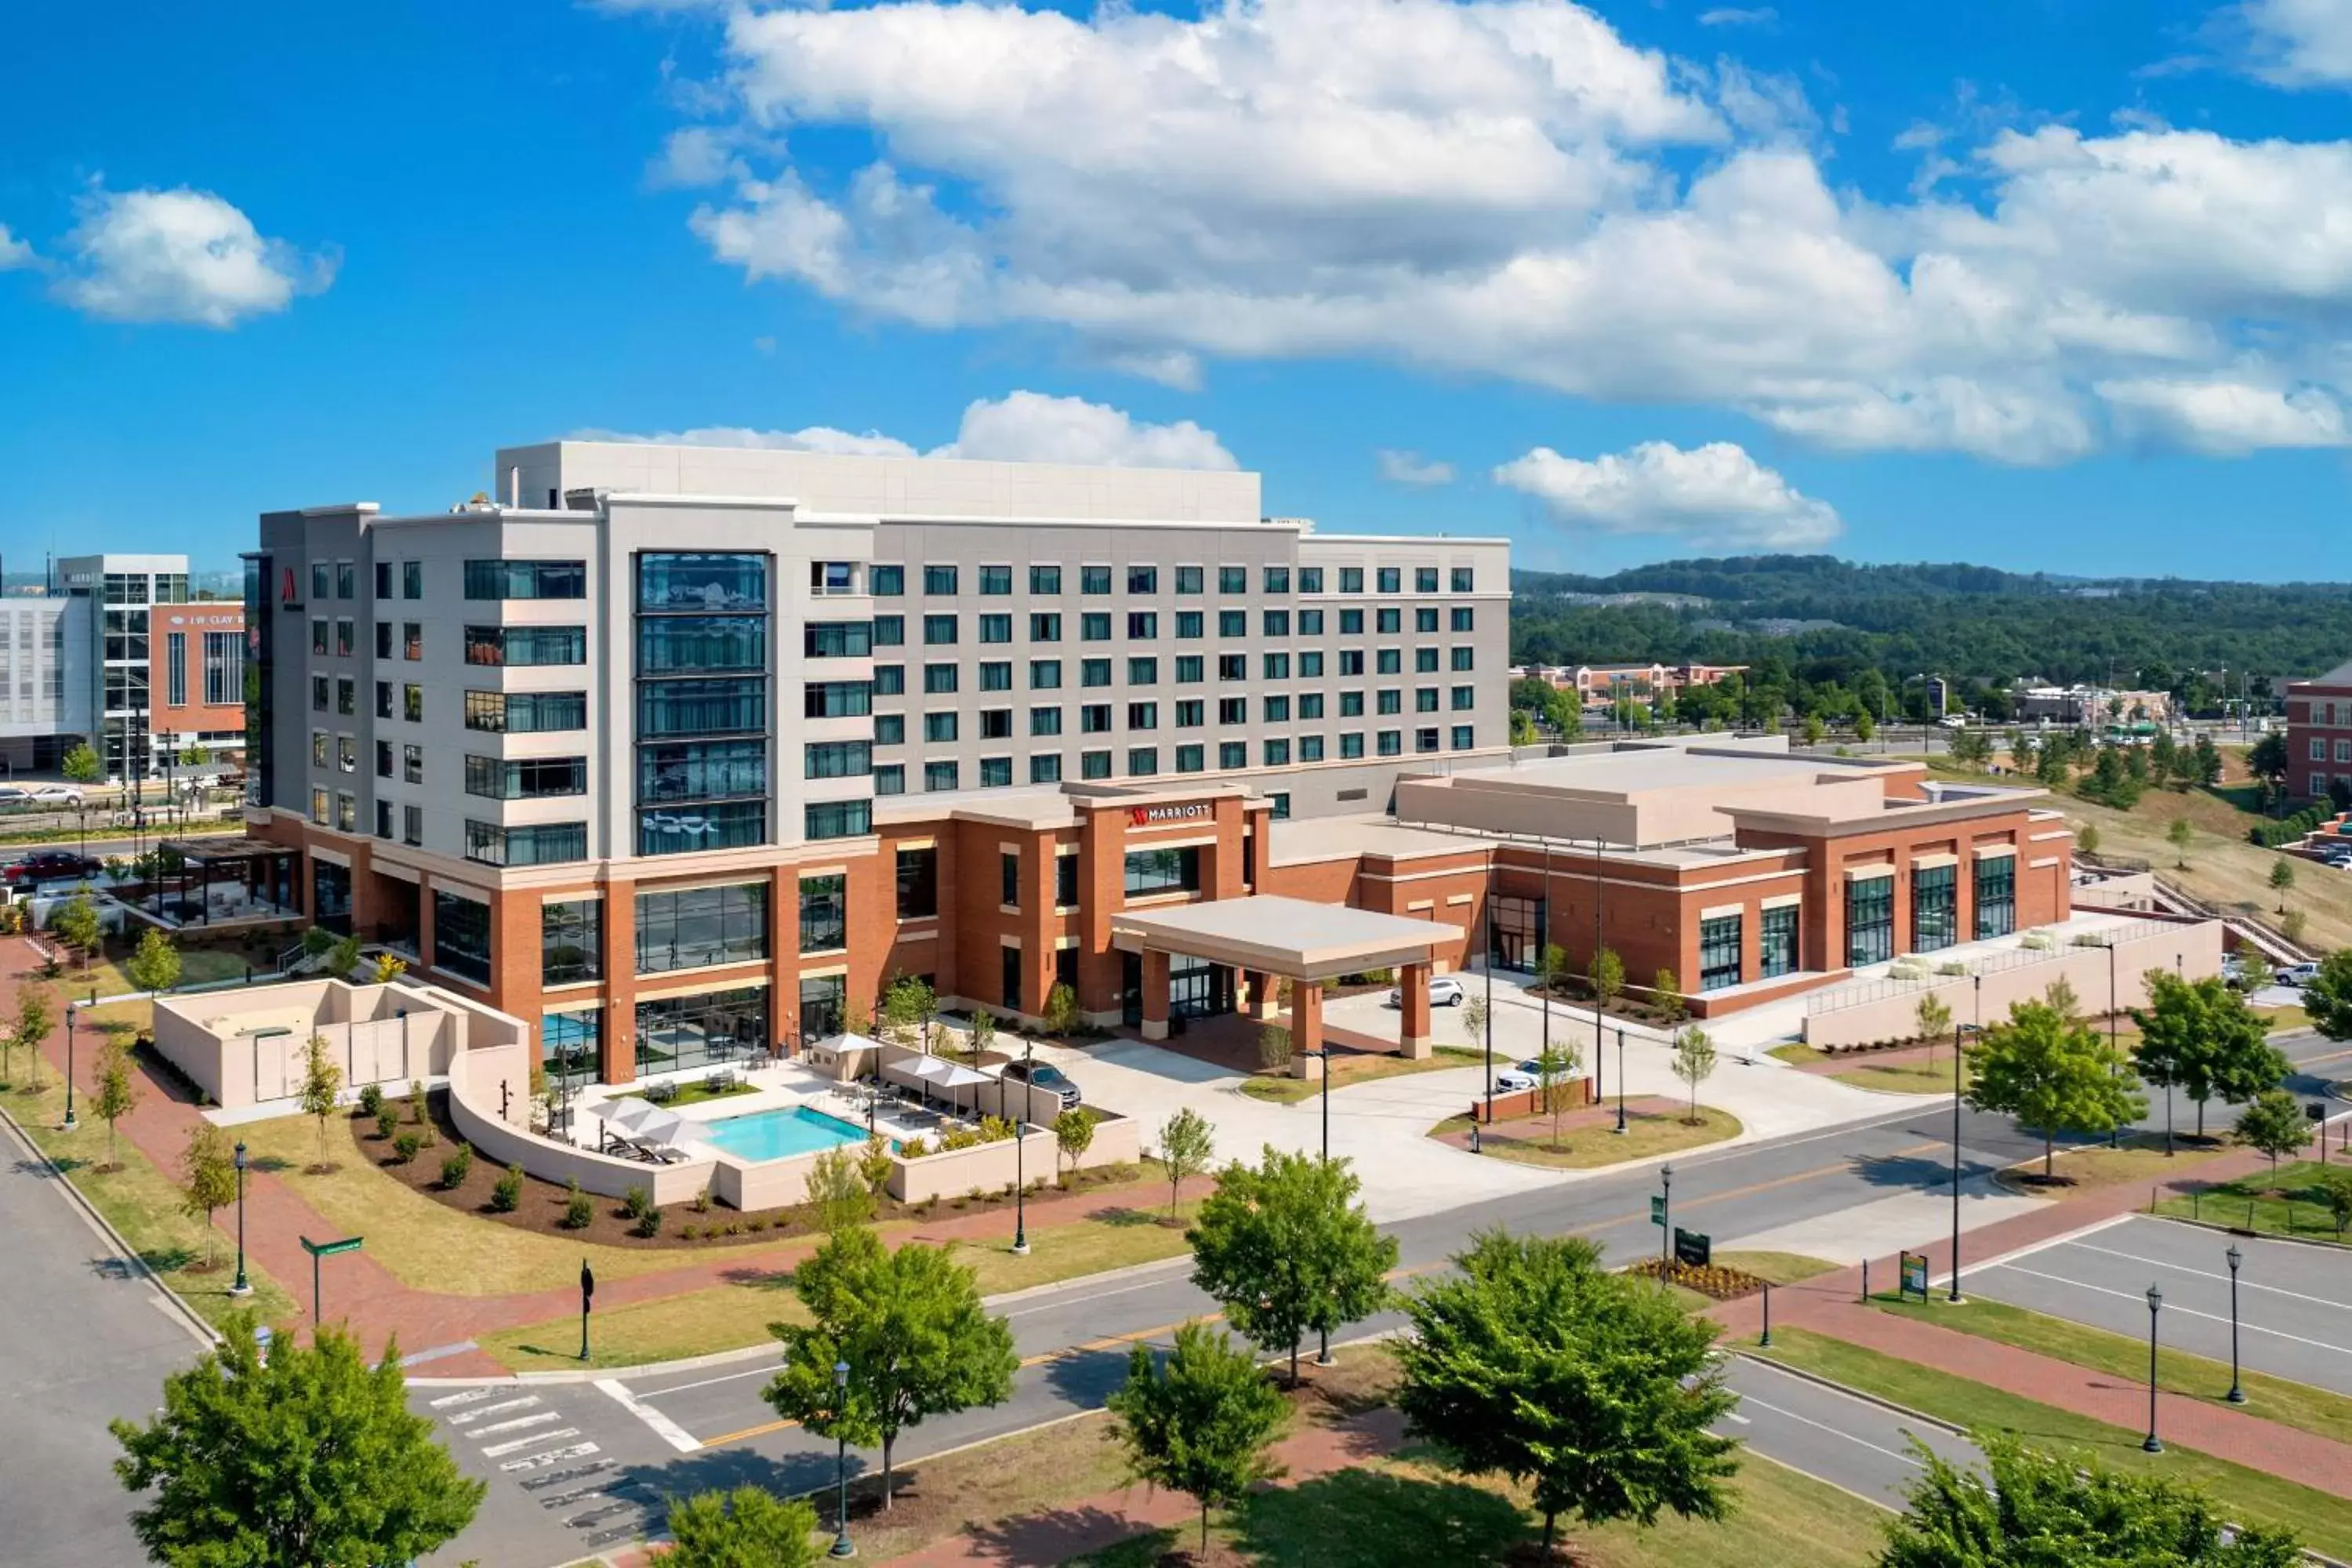 Property building, Pool View in UNC Charlotte Marriott Hotel & Conference Center